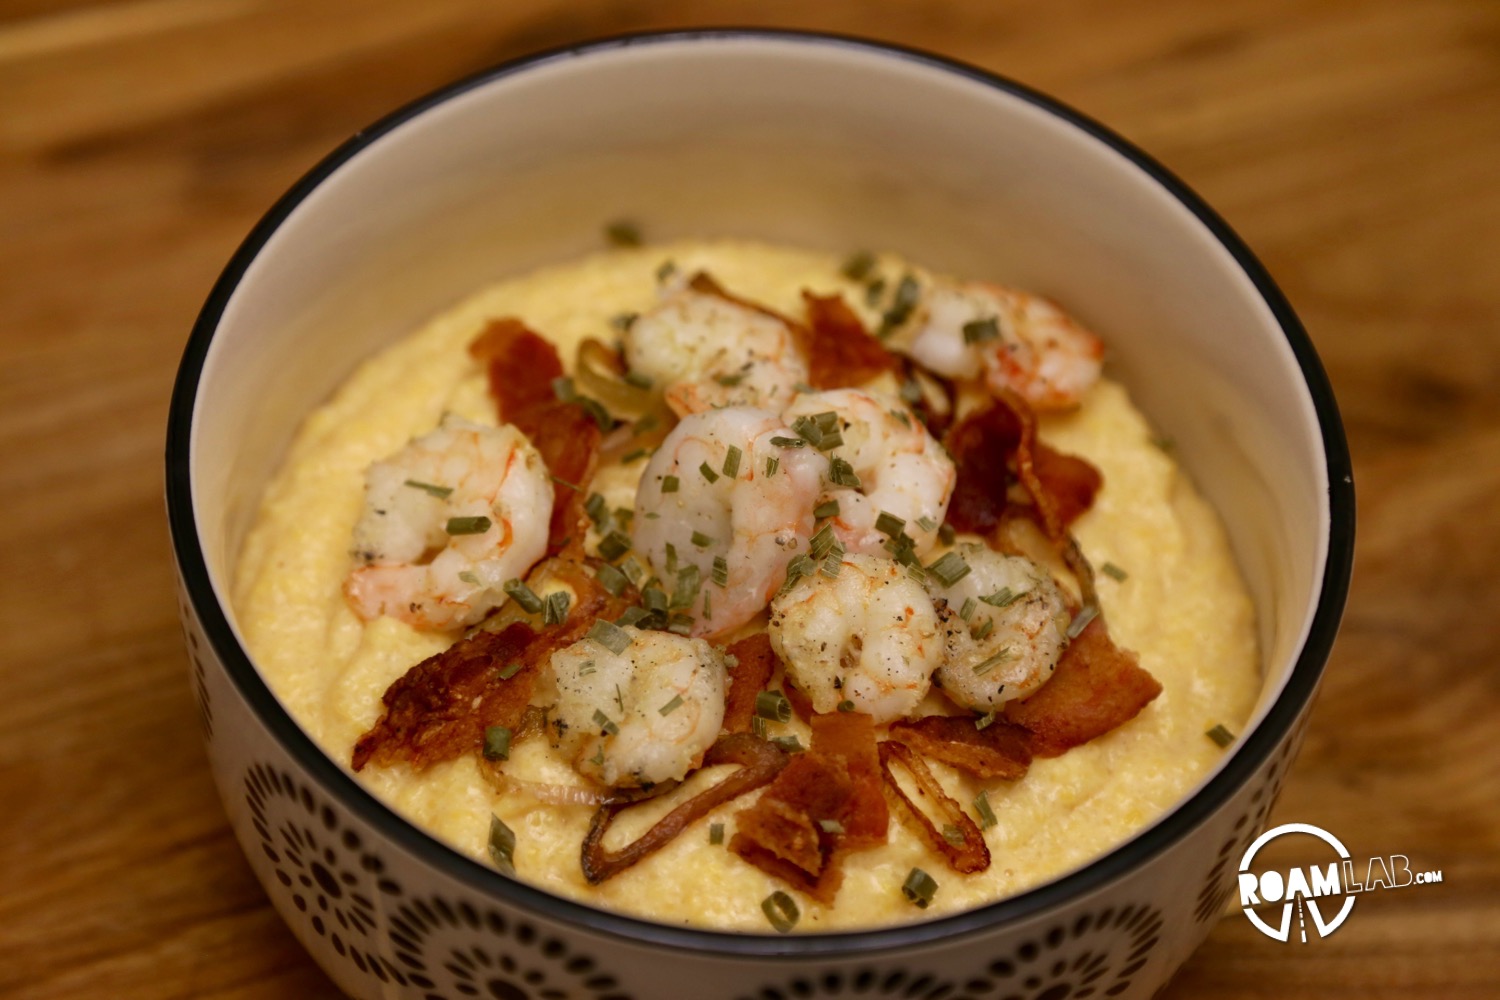 We were in the South, so it only seemed appropriate to experiment with some local fair. Thus, we concocted with Down Home Shrimp & Grits with a camper friendly twist.